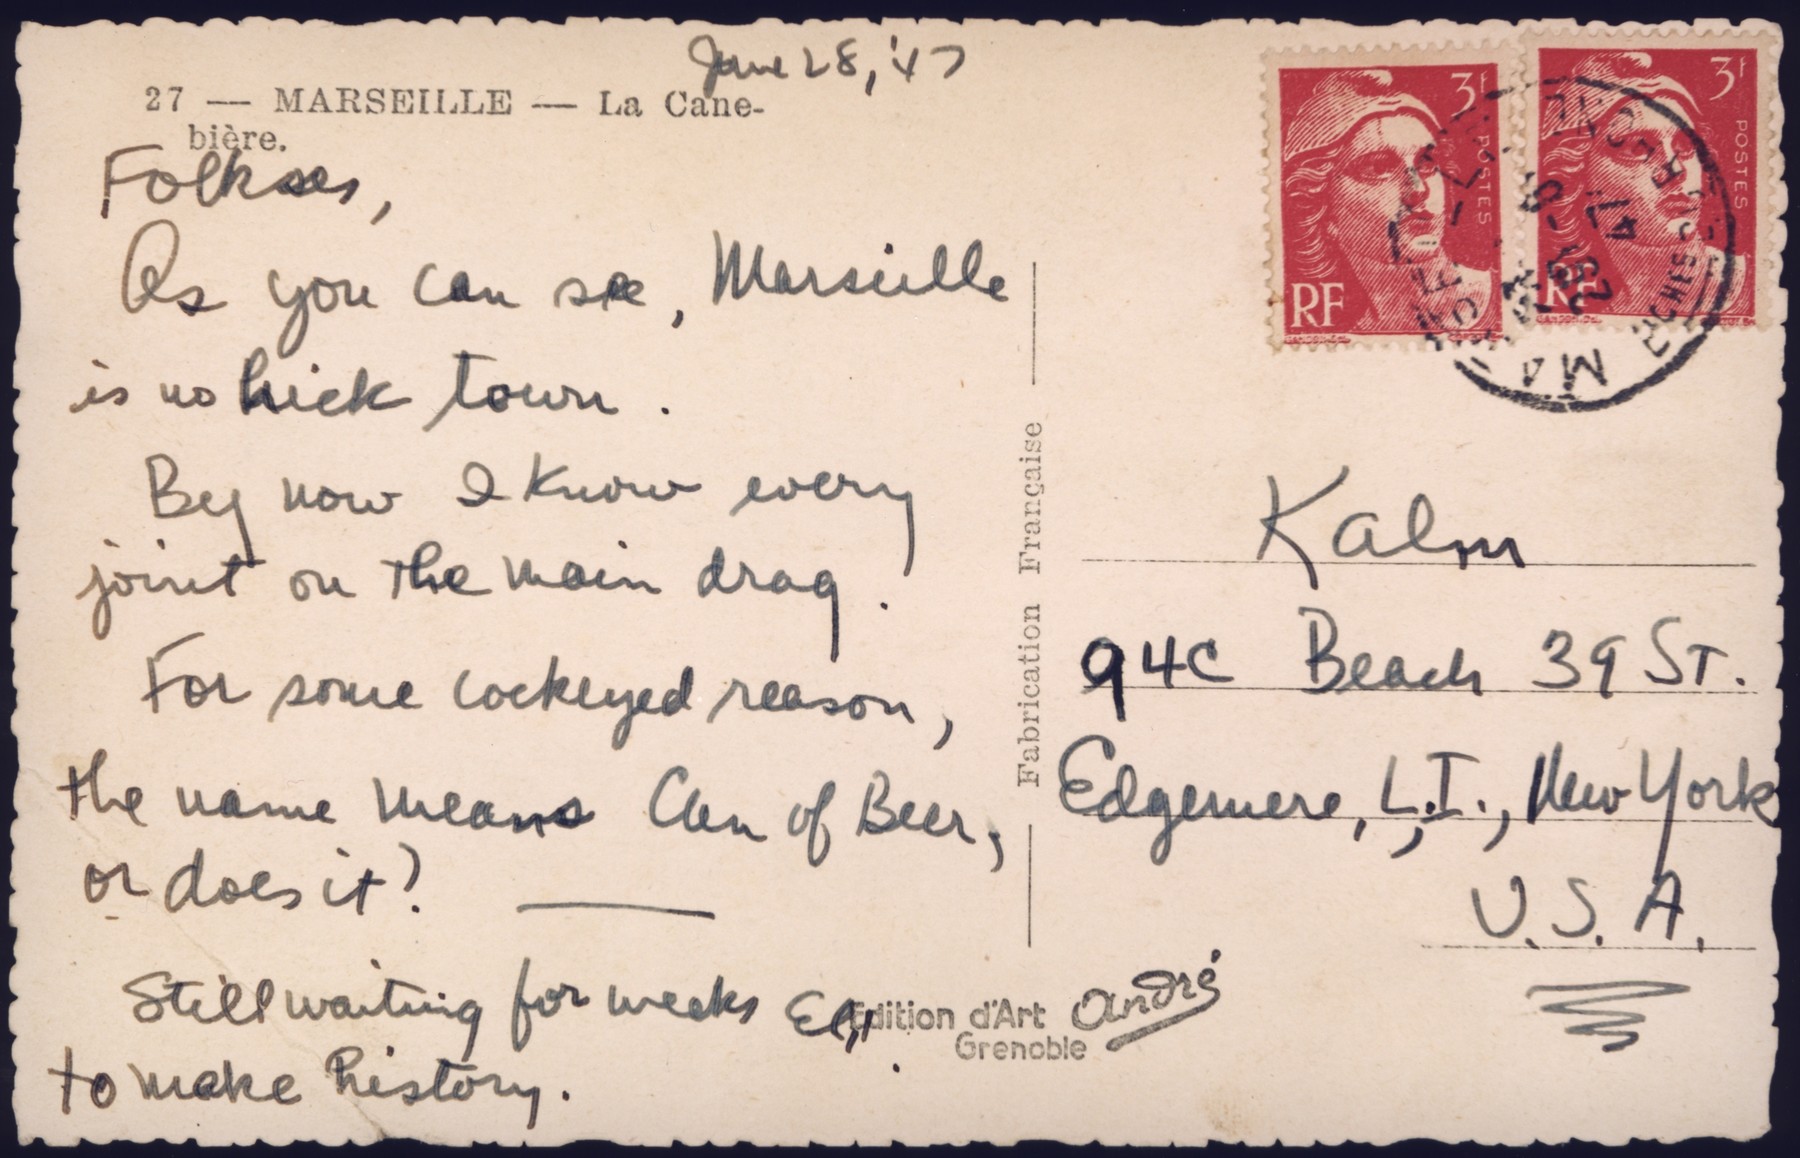 Postcard sent from Marseille by Eli Kalm, a crew member of the President Warfield/Exodus 1947, to his family in New York just before the ship left France for Palestine.

Kalm writes that he and his colleagues have been "waiting for weeks to make history."